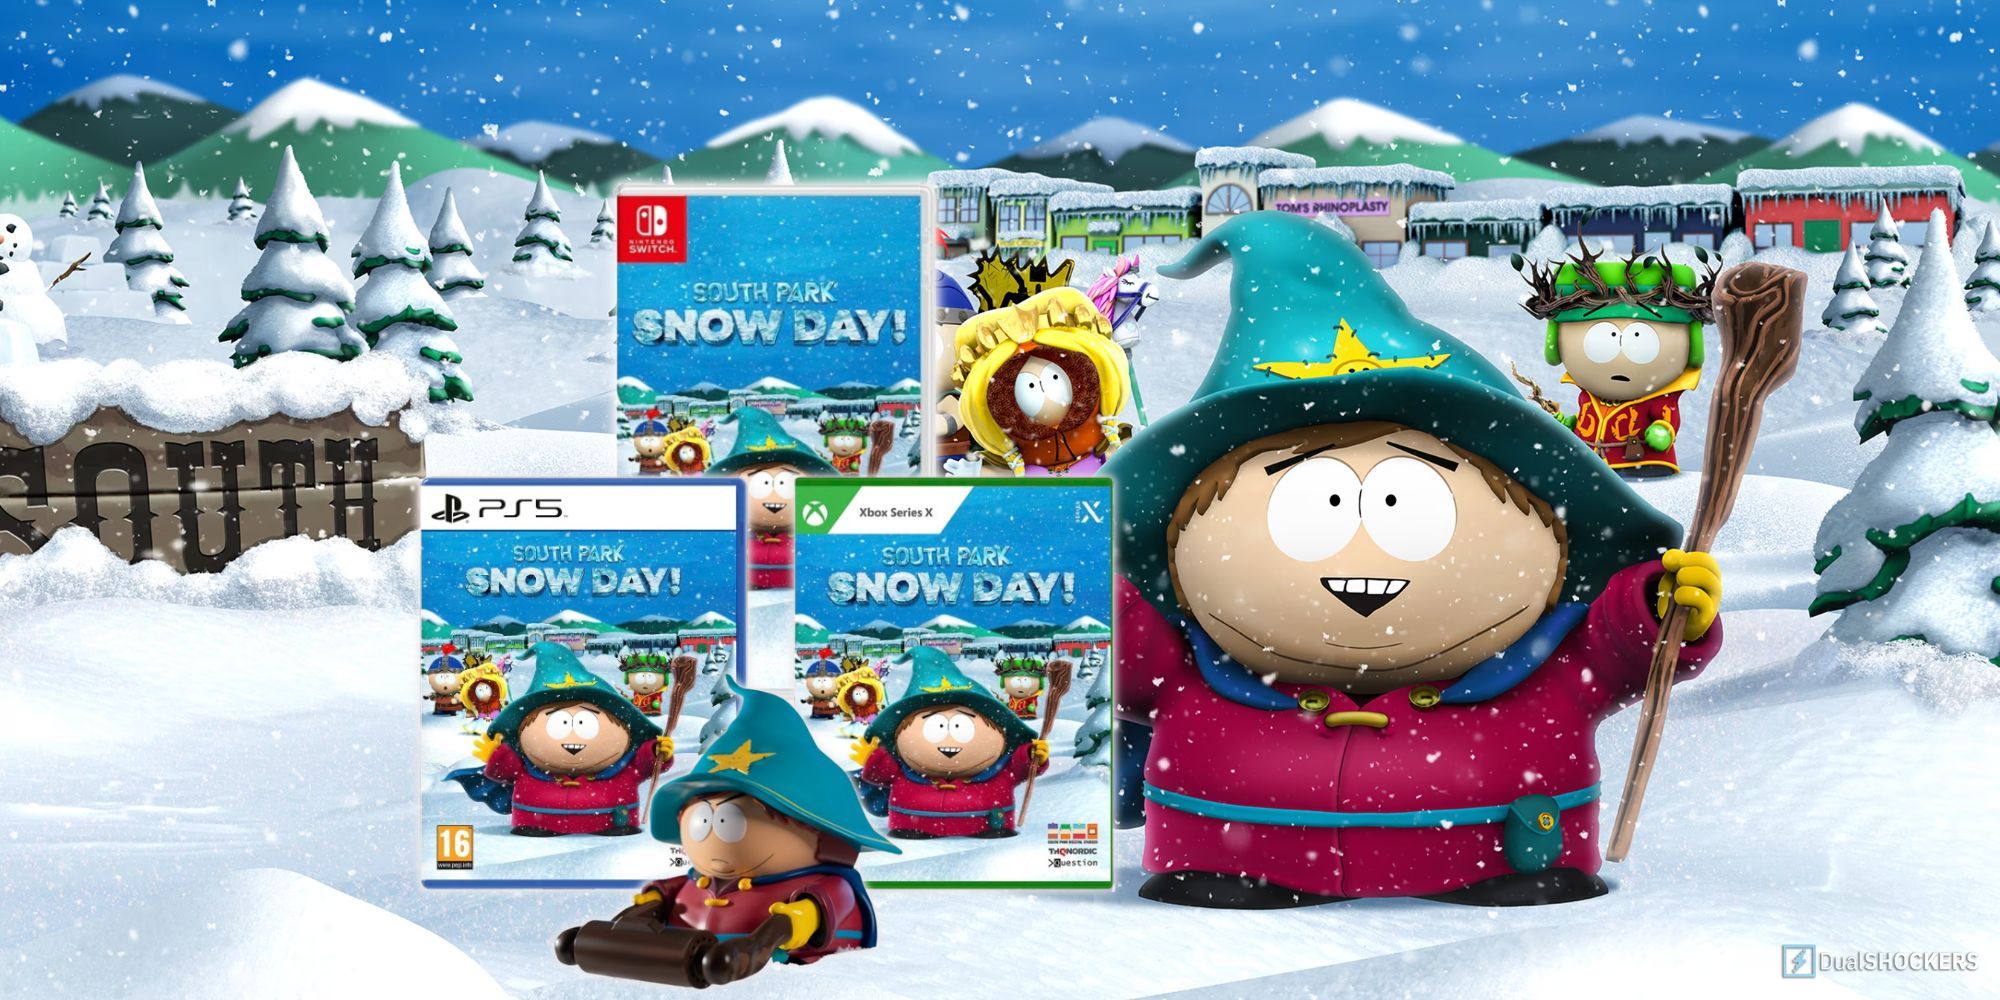 SOUTH PARK: SNOW DAY! Nintendo Switch - Best Buy